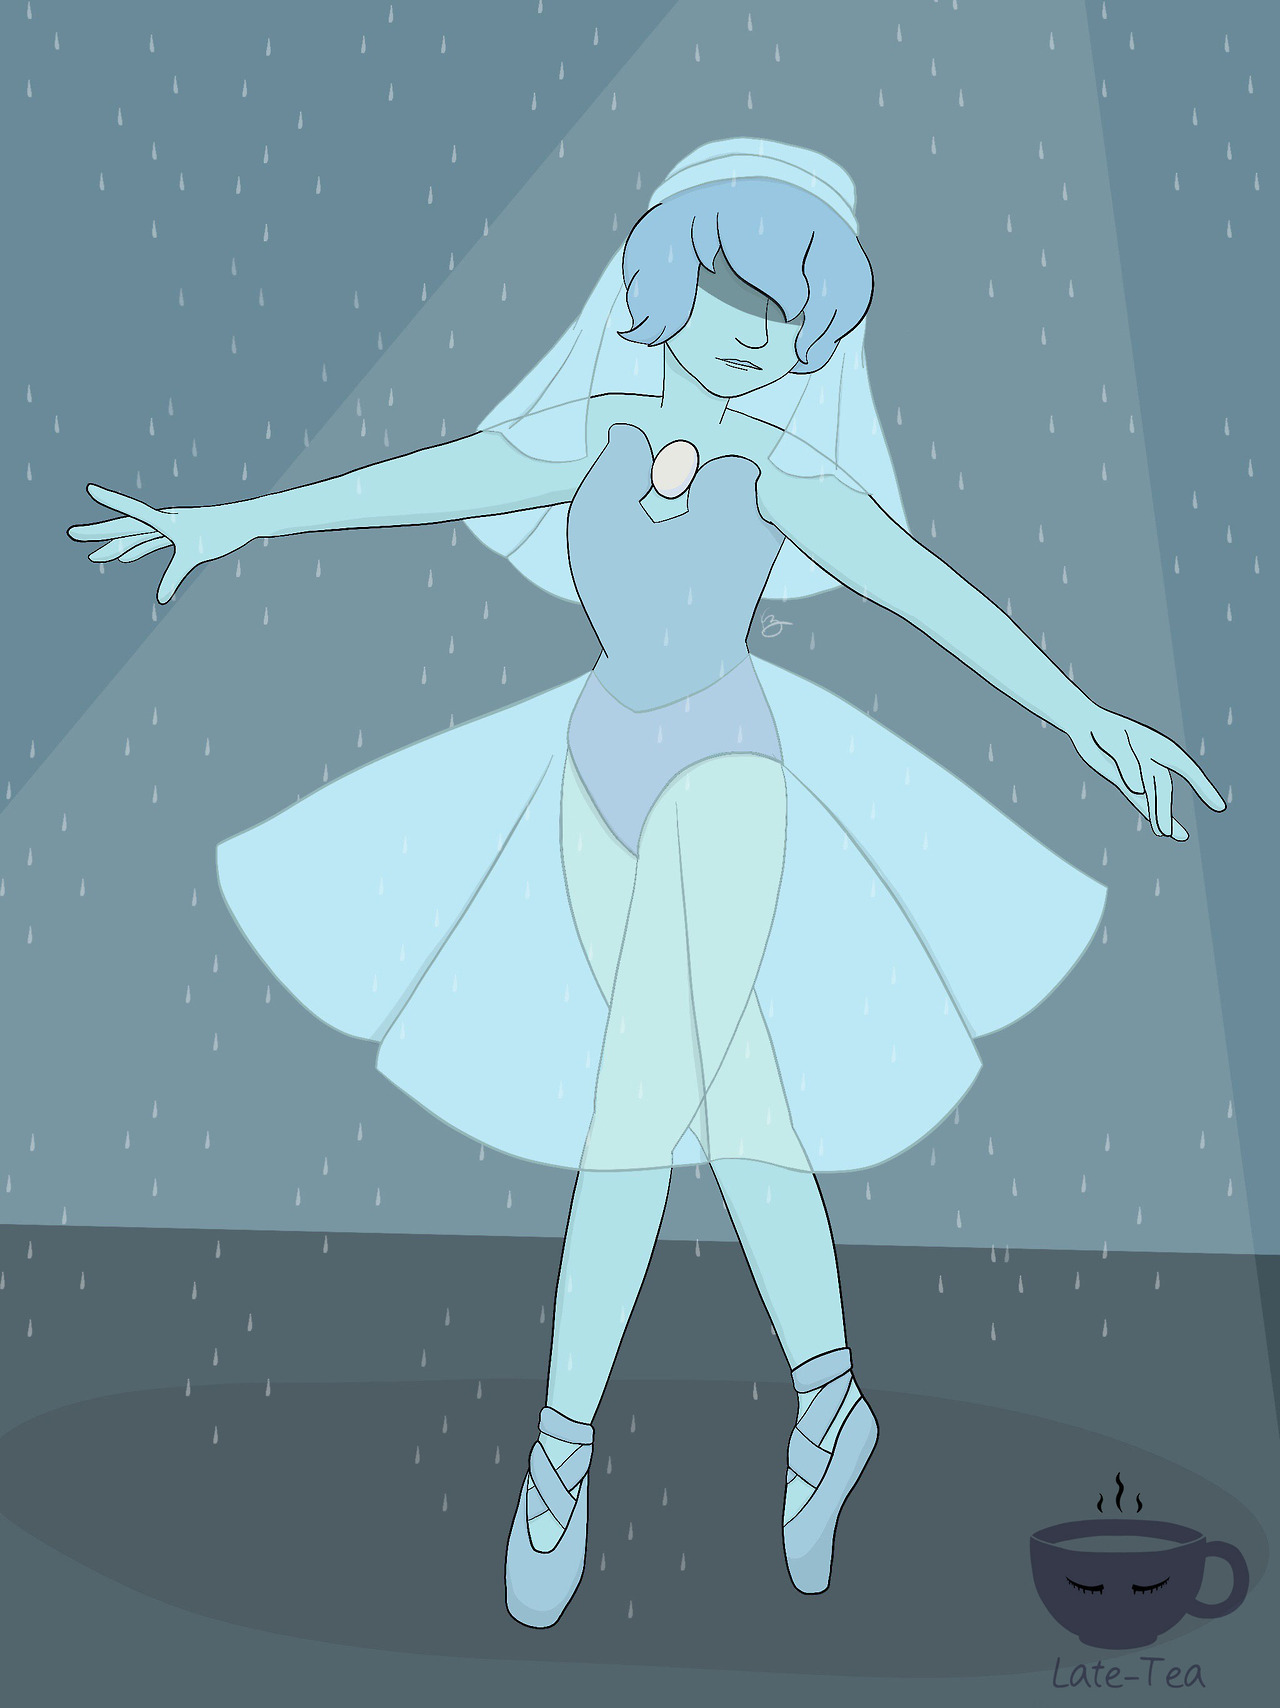 My three dancing Pearls I drew for my dancing pearl series of speed drawings. I uploaded one speed drawing video to my youtube channel, and plan to upload the rest soon!